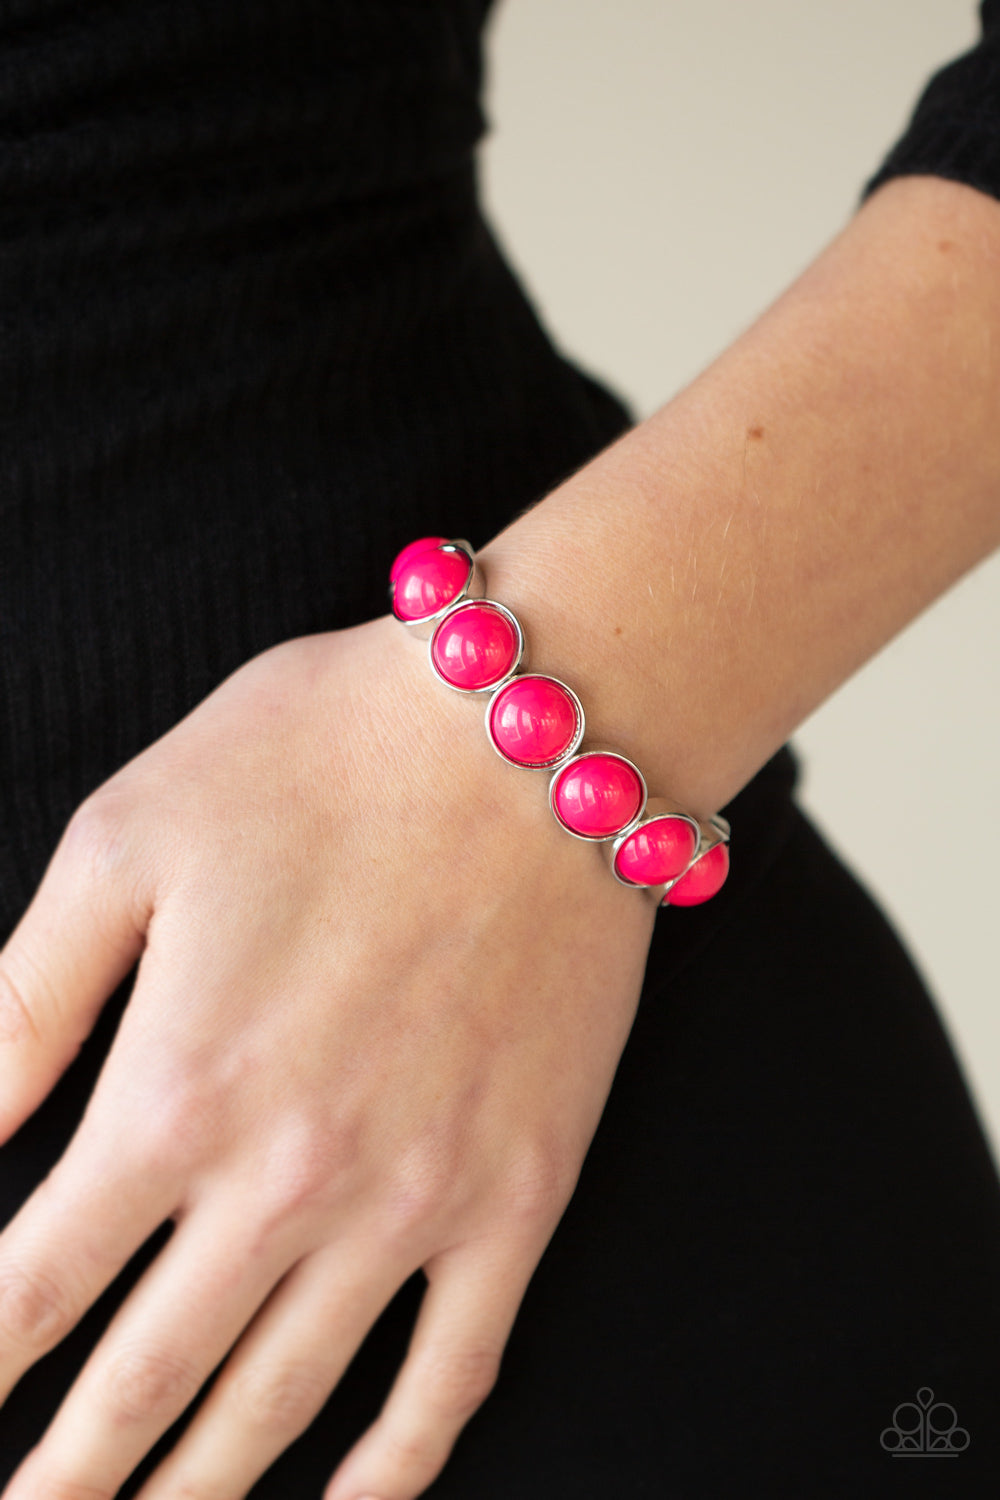 POP, Drop and Roll- Pink and Silver Bracelet- Paparazzi Accessories